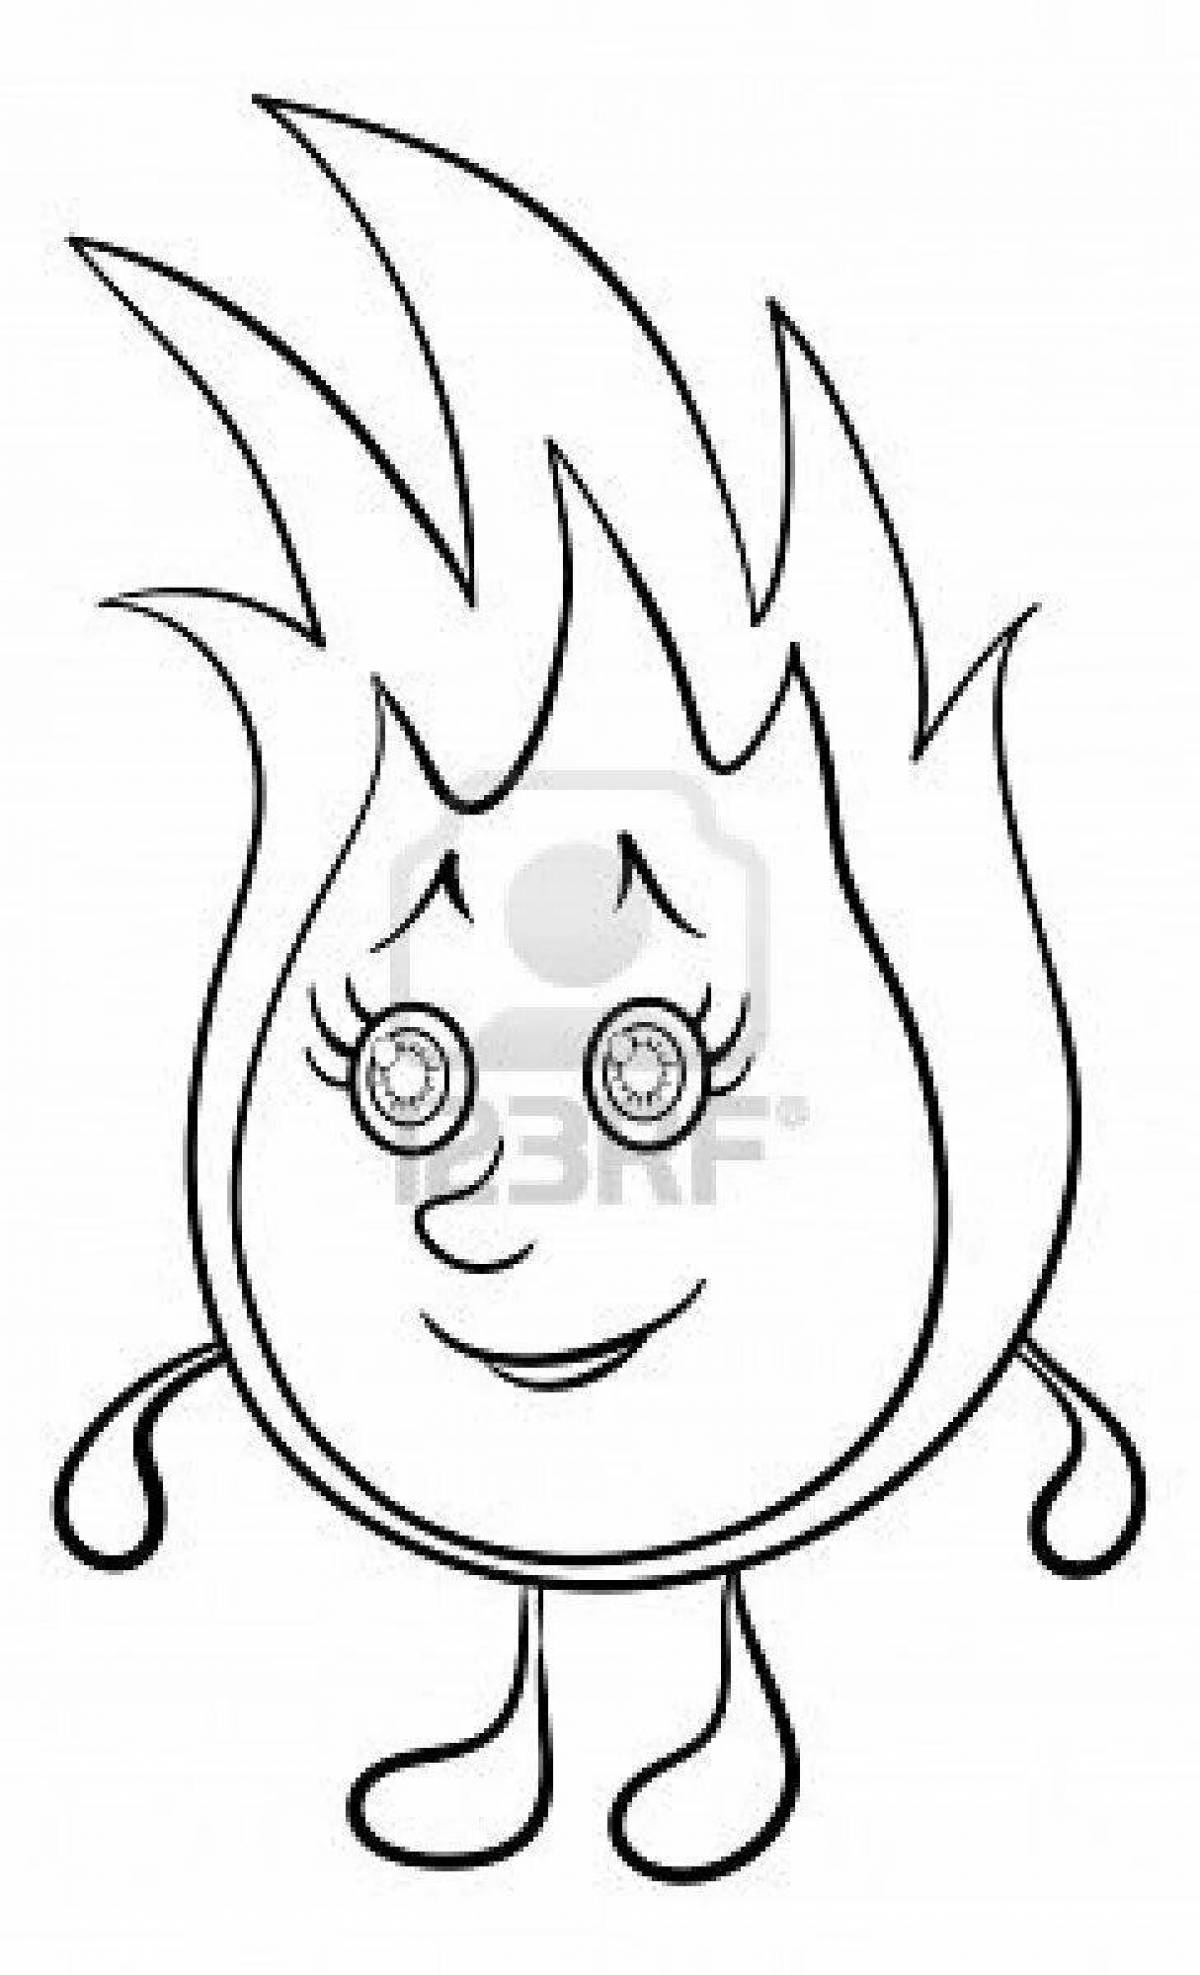 Comic fire coloring book for children 3-4 years old